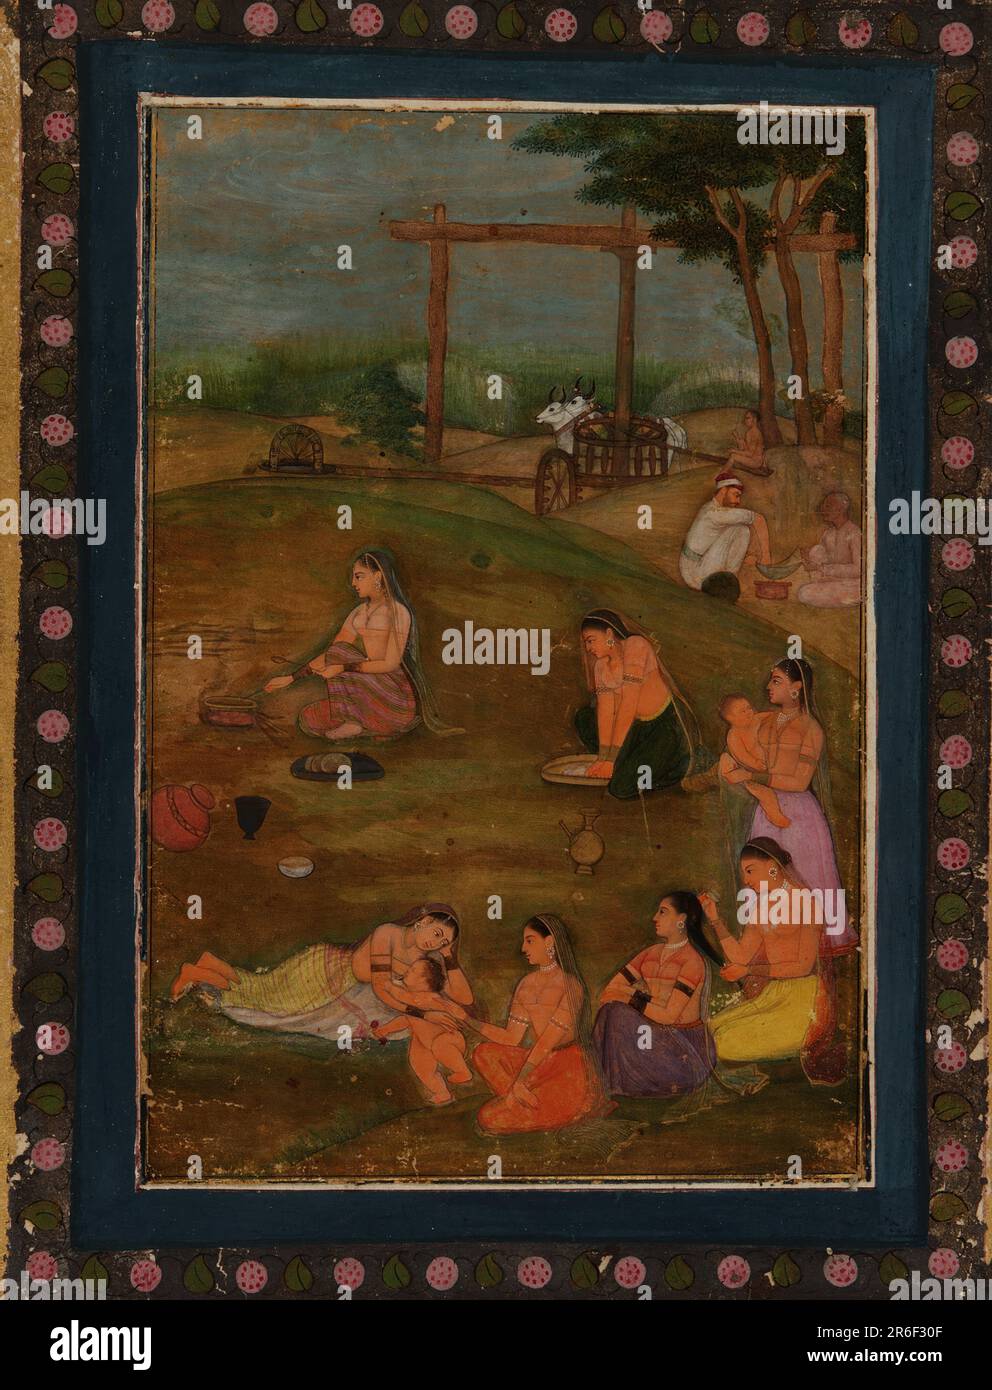 A Village Scene. Date: ca. 1640. Origin: India. Period: Mughal dynasty. Color and gold on paper. Museum: Freer Gallery of Art and Arthur M. Sackler Gallery. Stock Photo